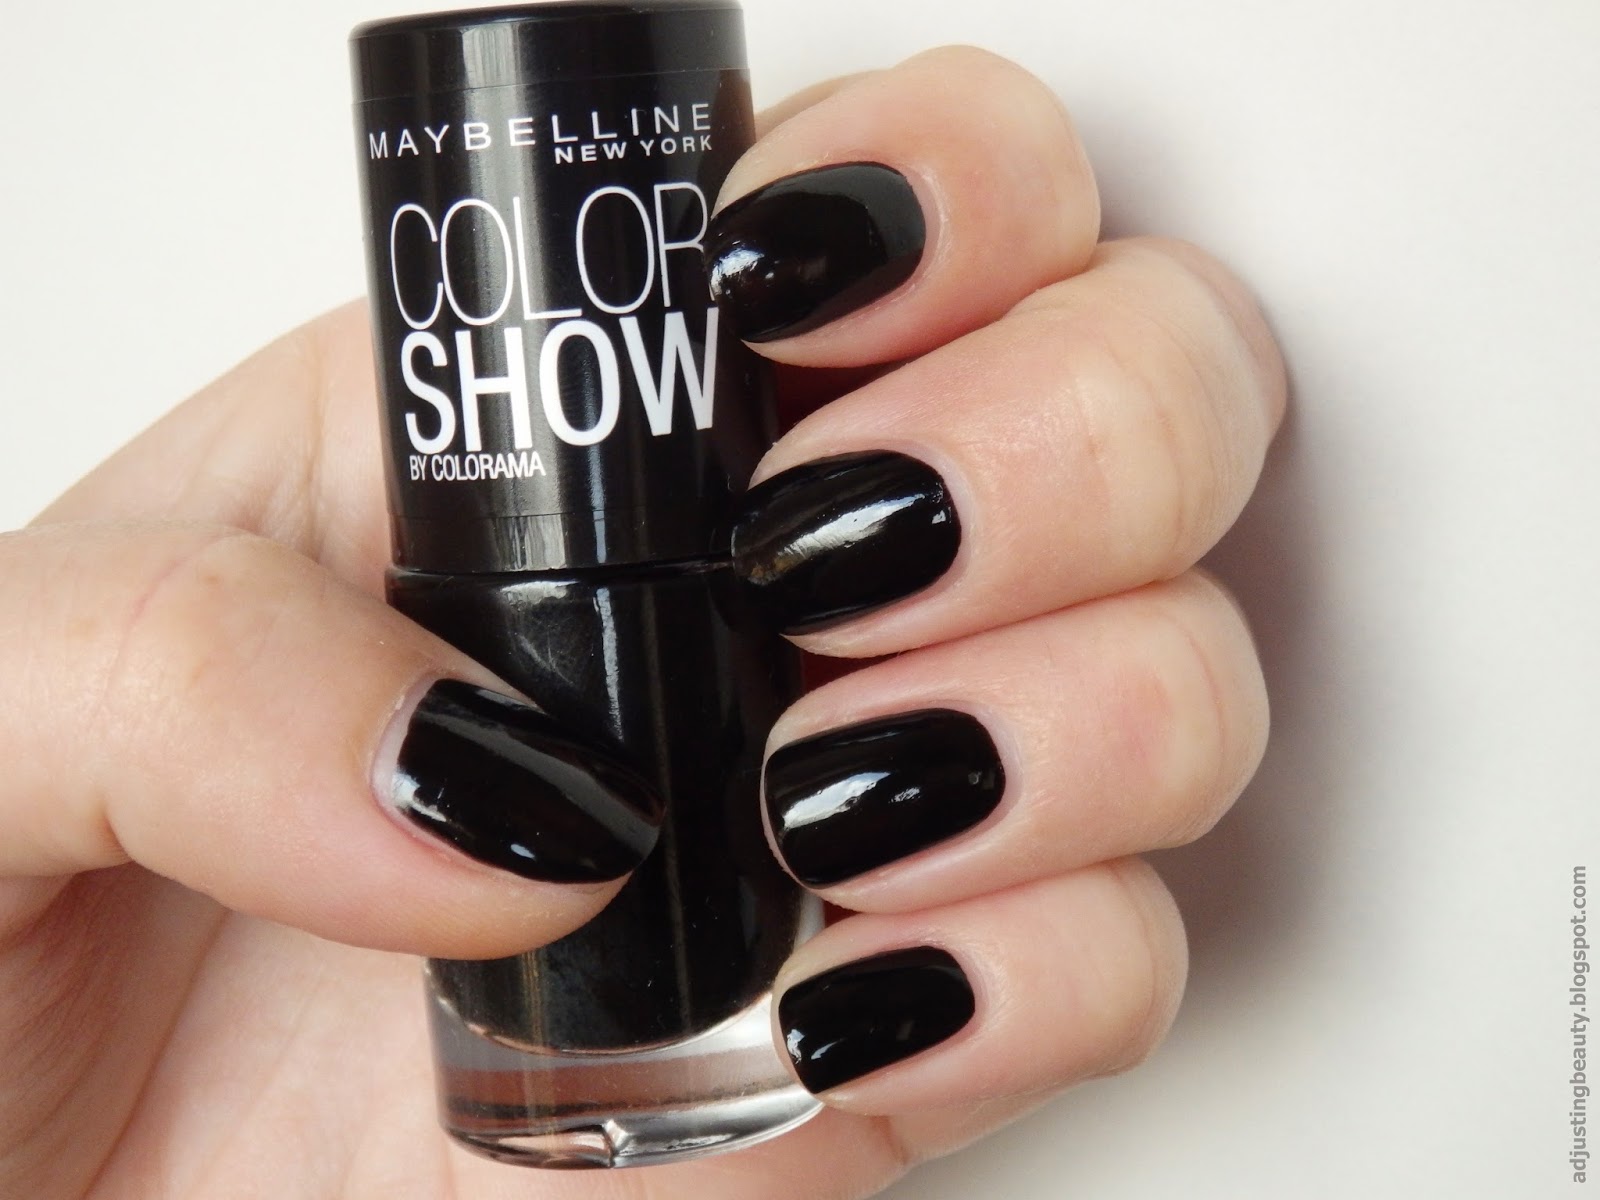 Maybelline Color Show Nail Polish in Power Red - wide 5